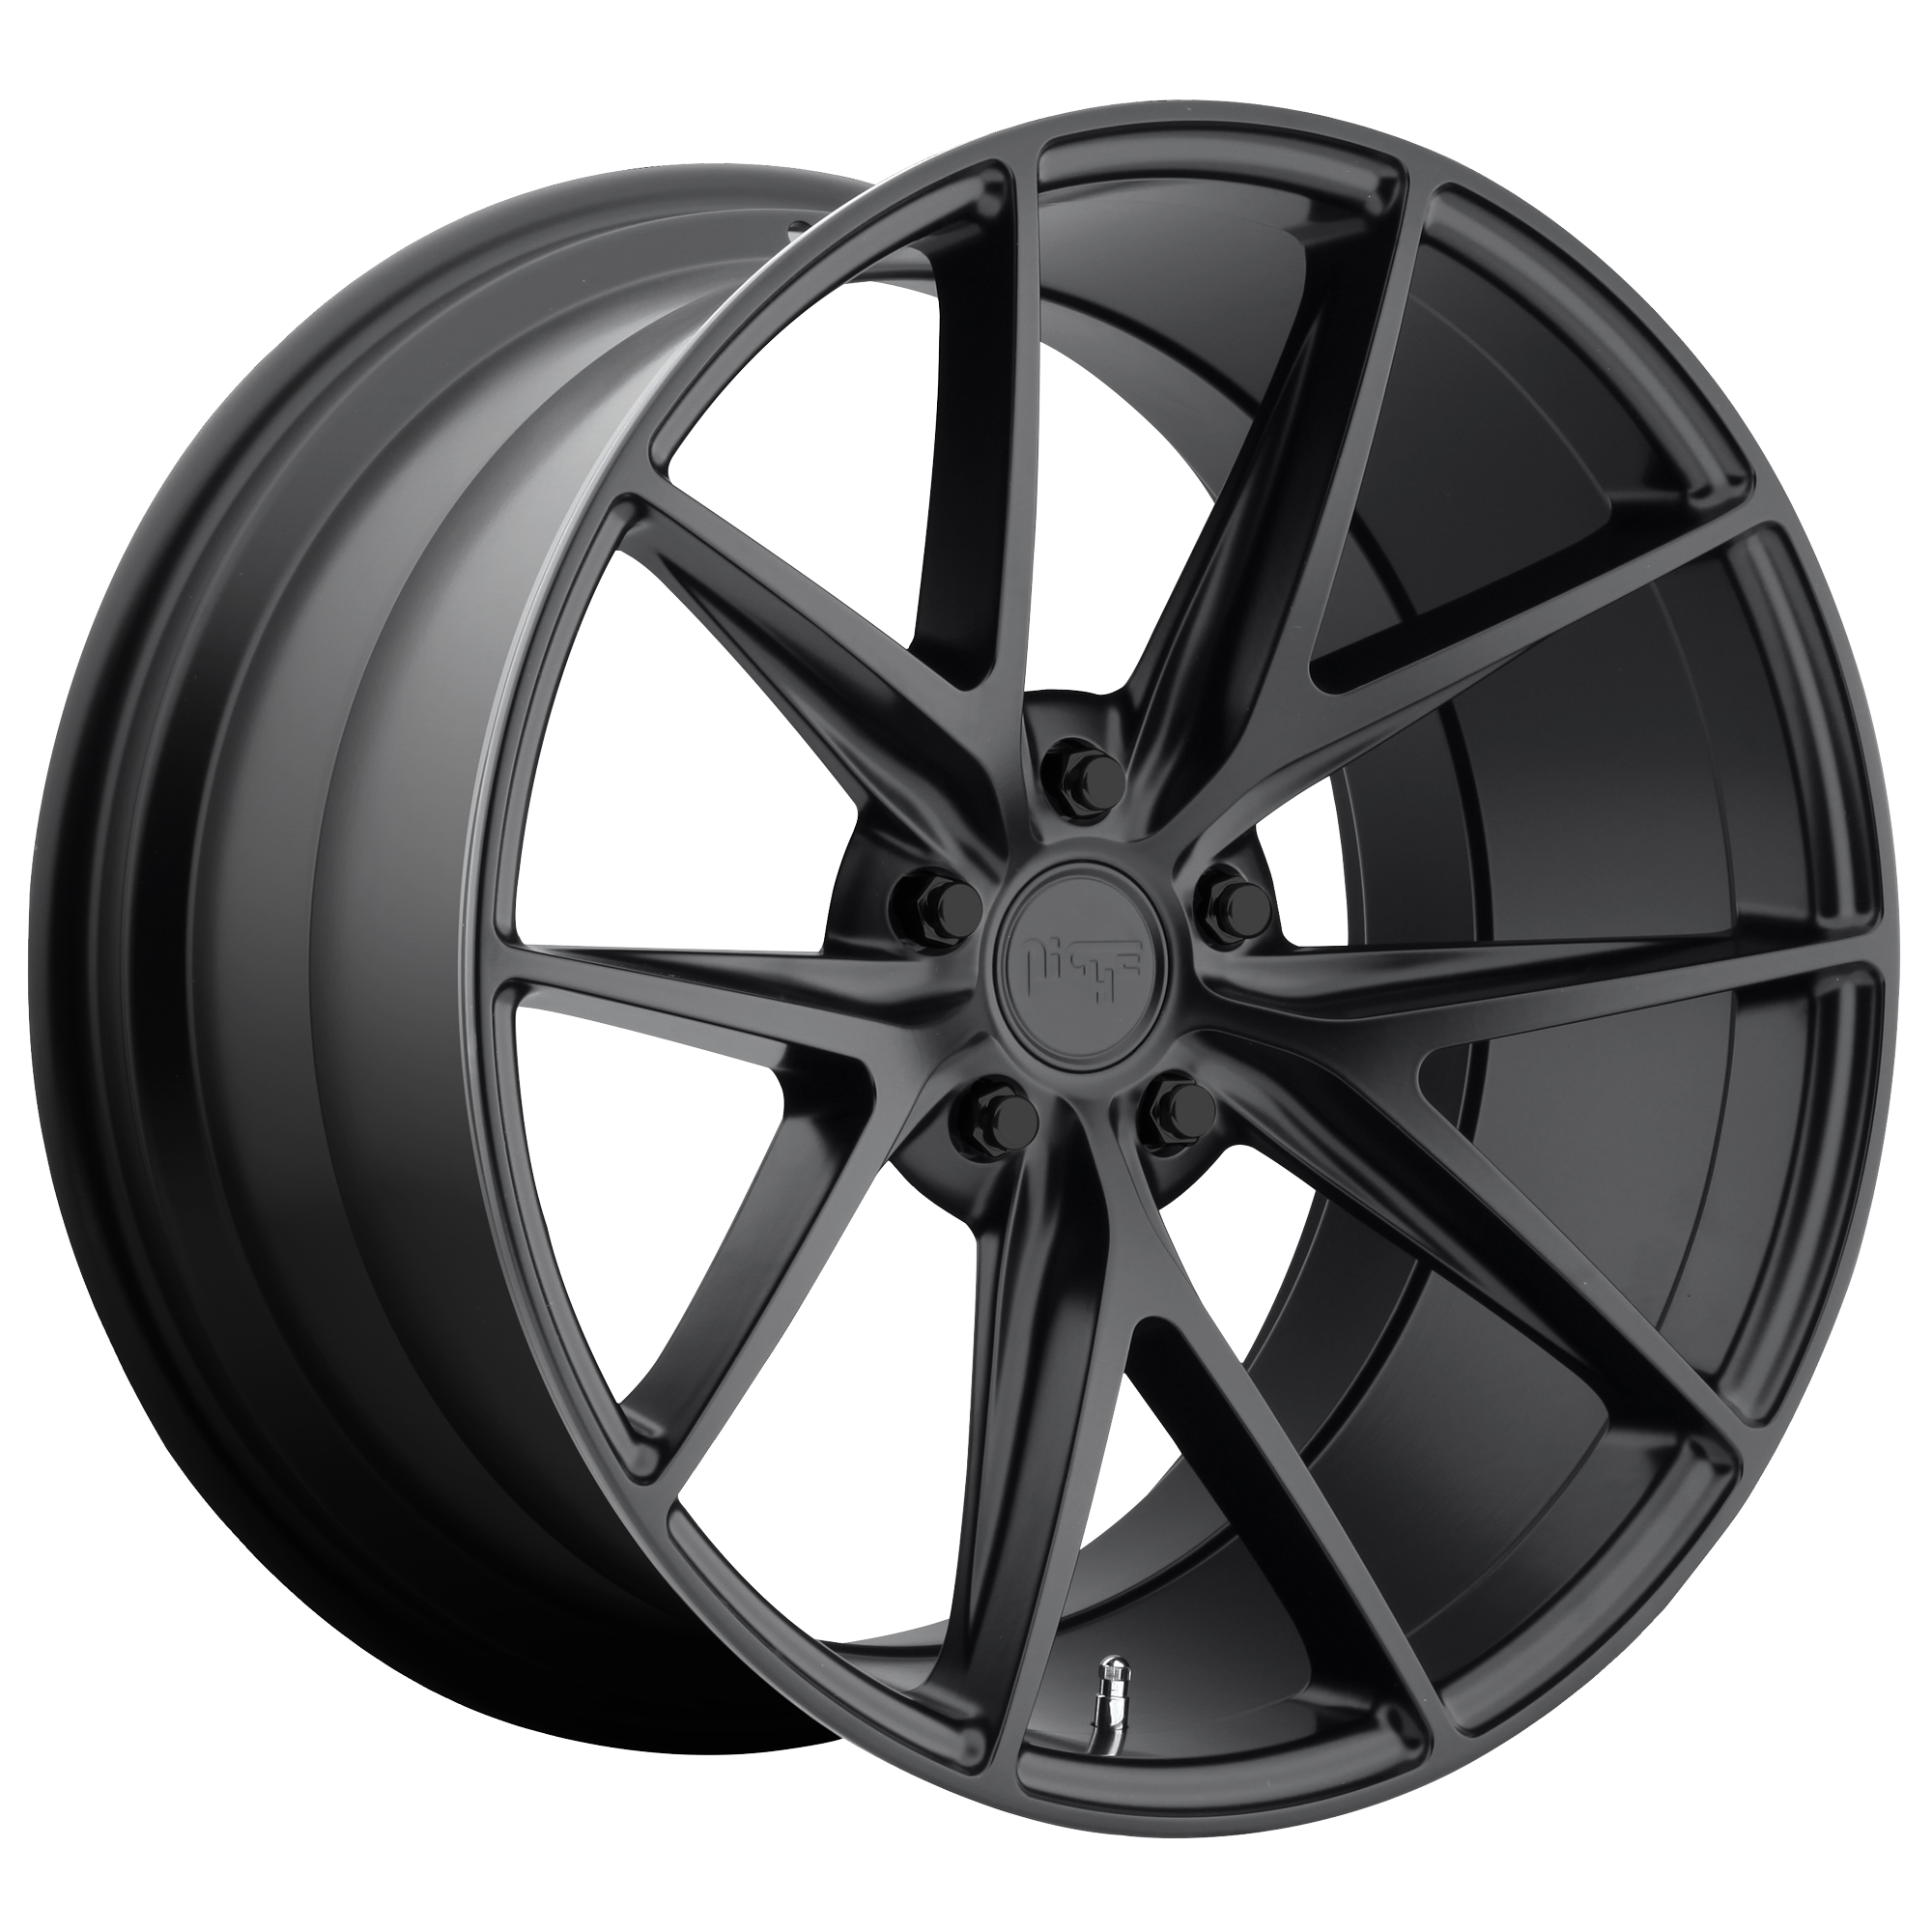 MISANO 22x10.5 5x112.00 MATTE BLACK (35 mm) - Tires and Engine Performance